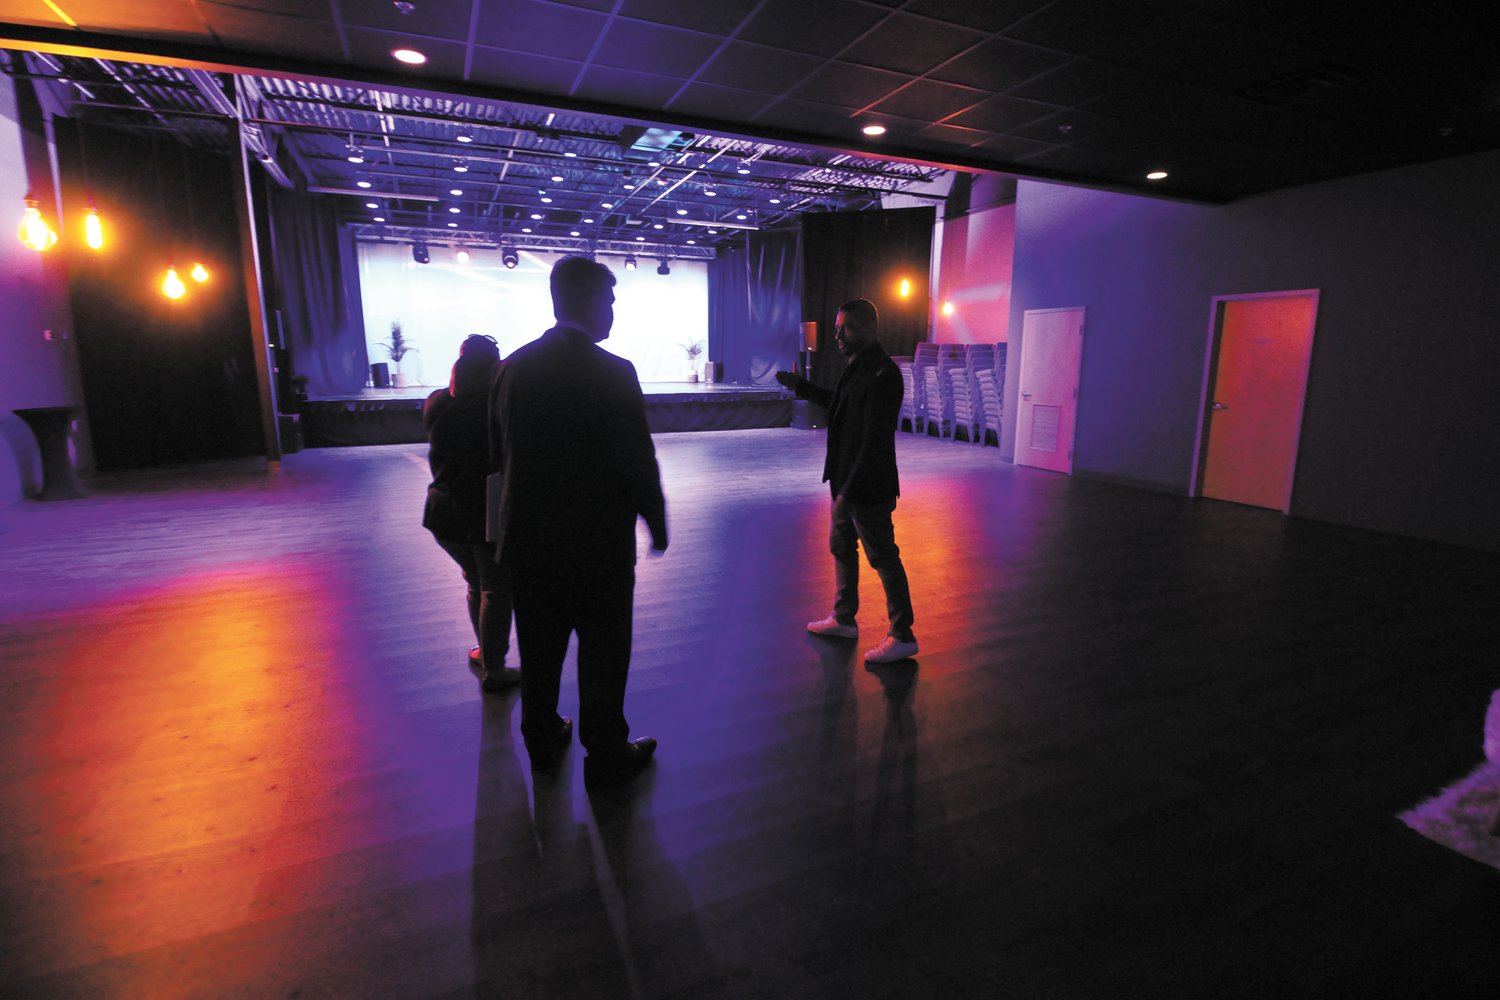 CENTER PIECE: The performance area with stage, high tech lighting and audio capable of seating 150 is the heart to the newly opened Talent Factory at 144 Metro Center Boulevard. (Warwick Beacon photos)